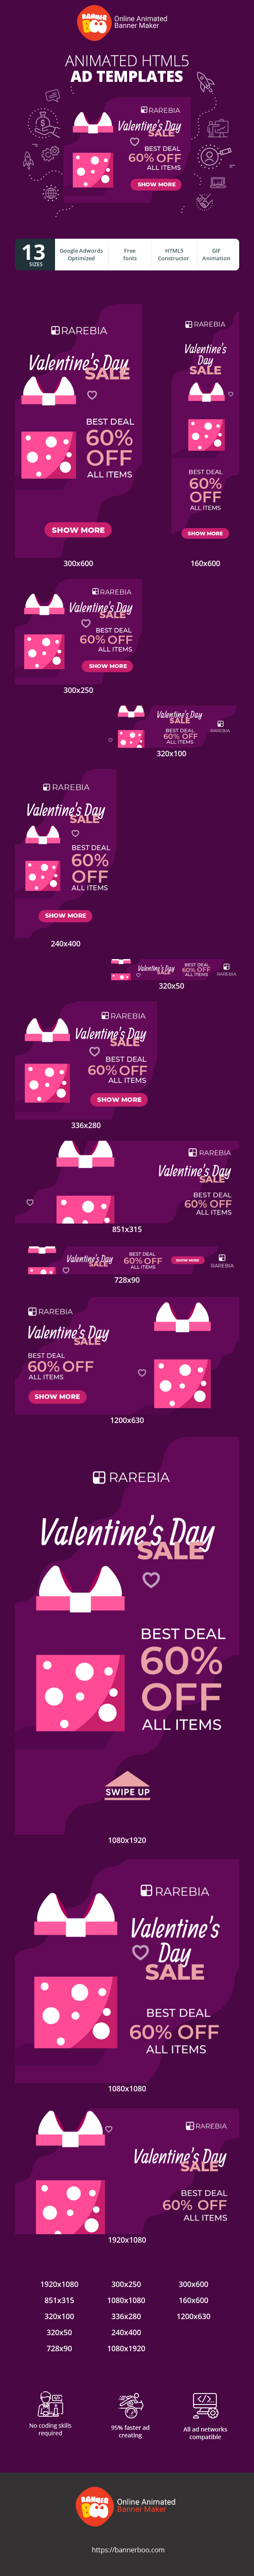 Valentine's Day Sale — Best Deal 60% Off All Items